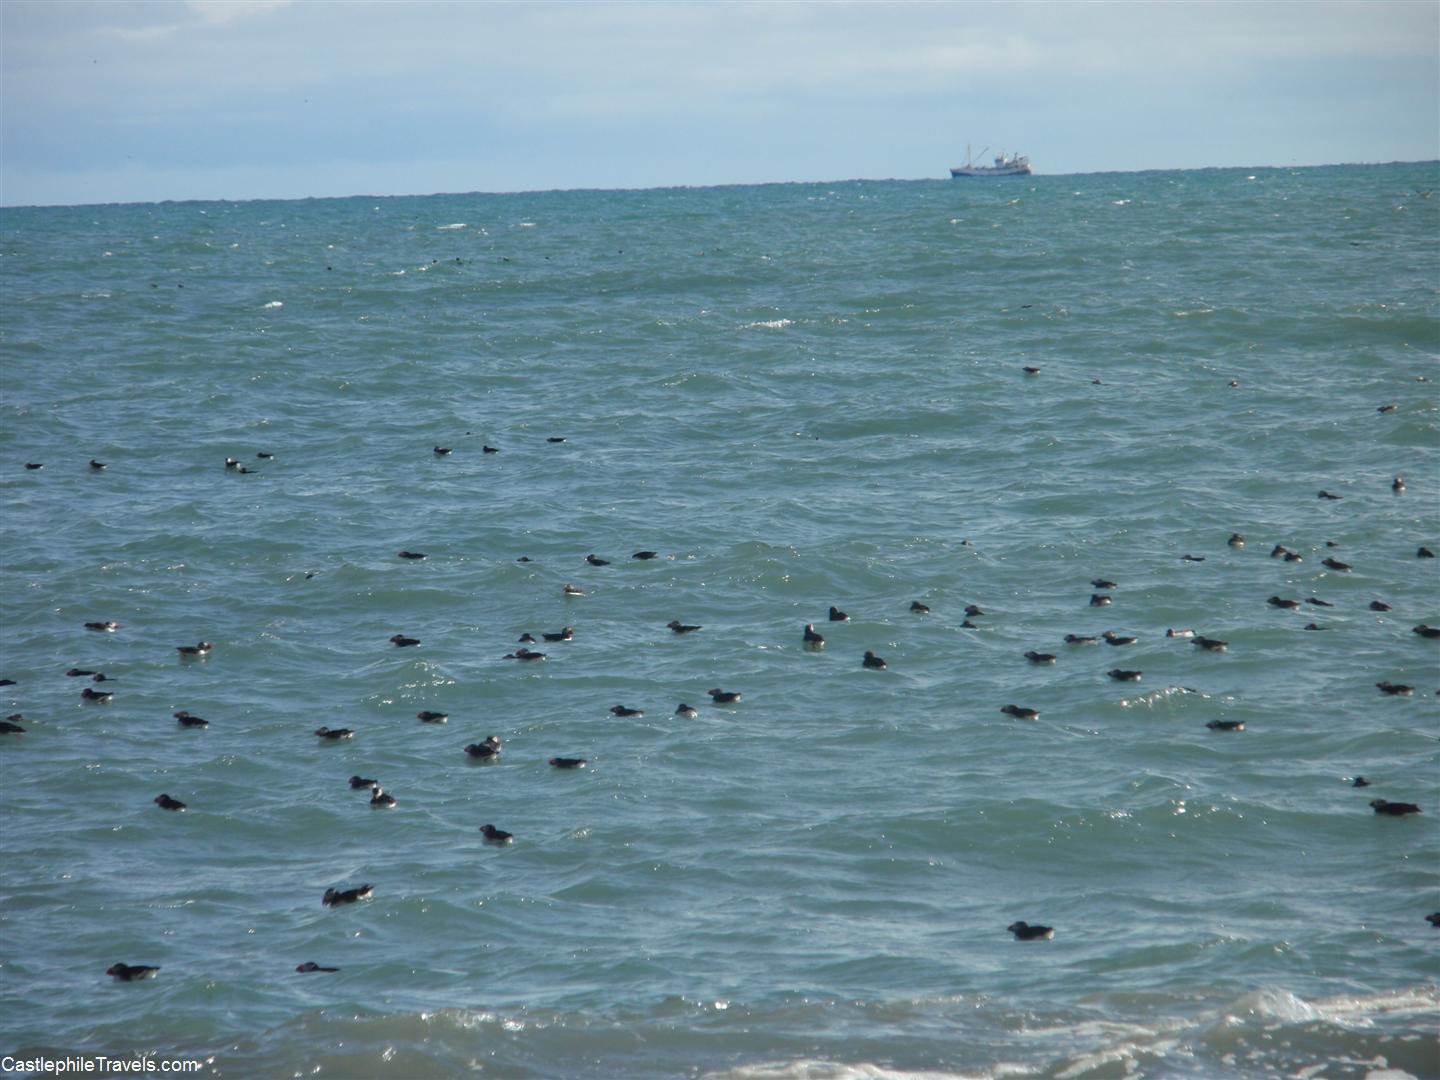 Puffins floating in the ocean